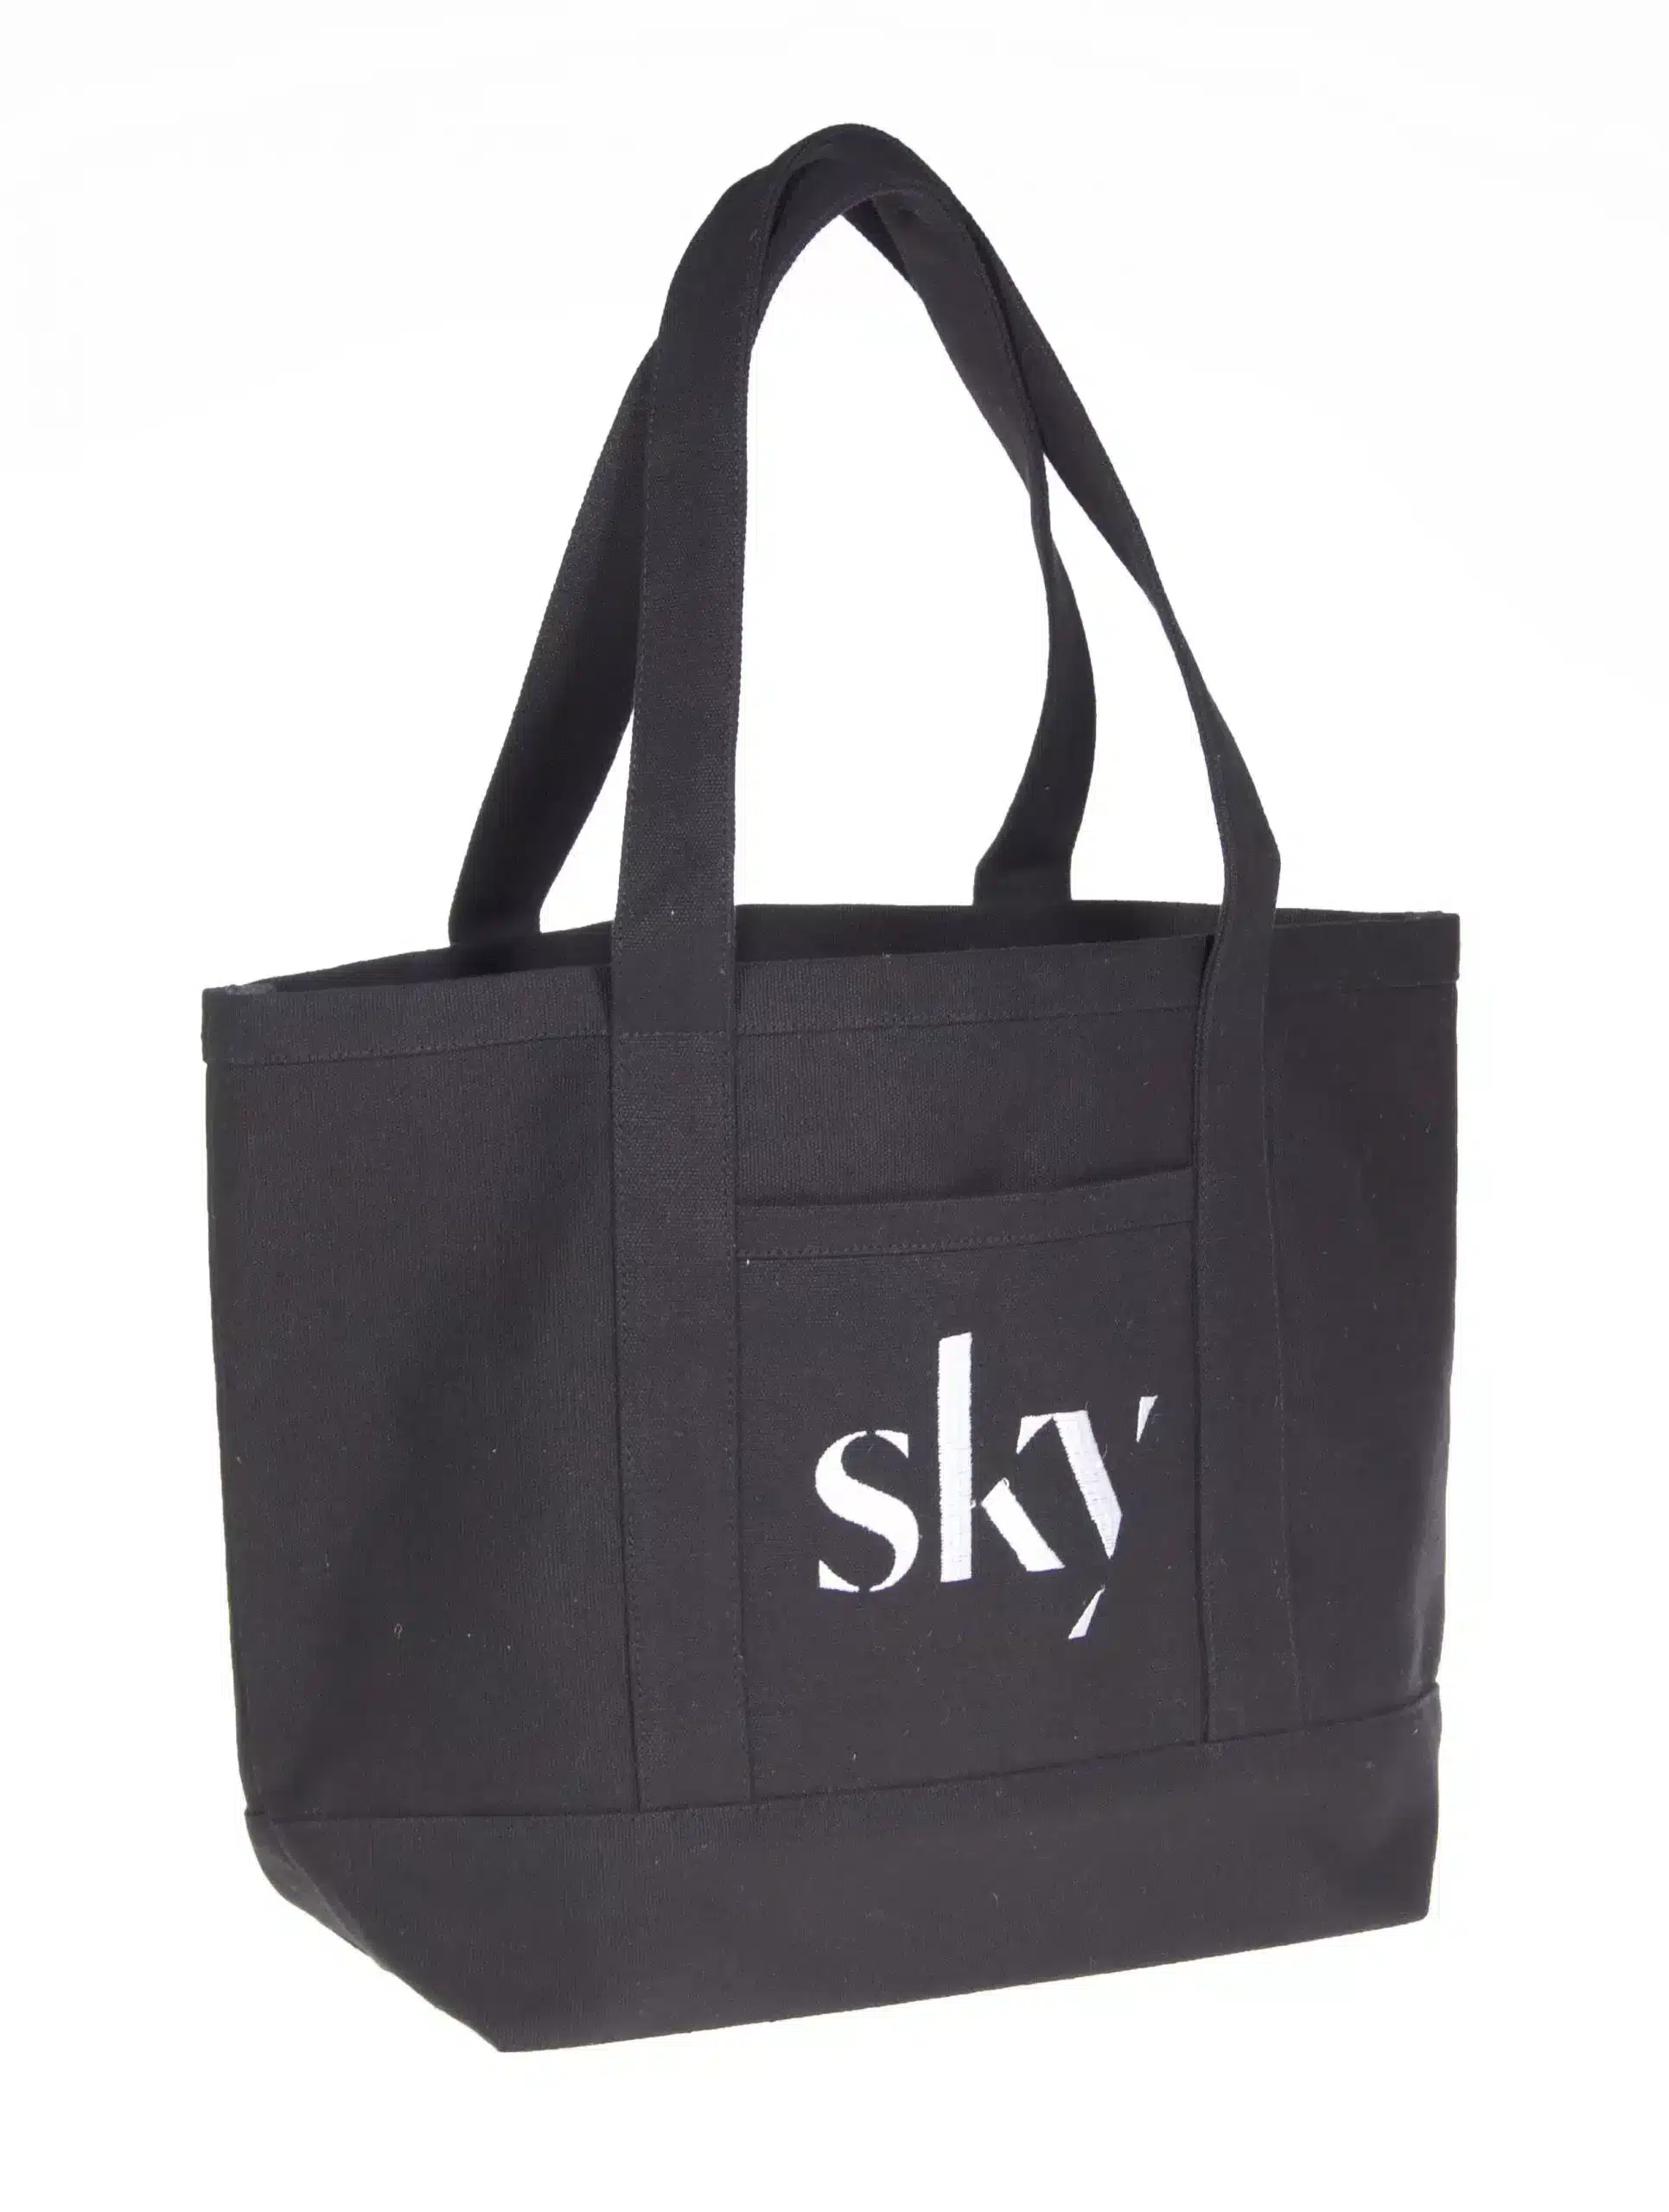 embroidered SKY TOTE